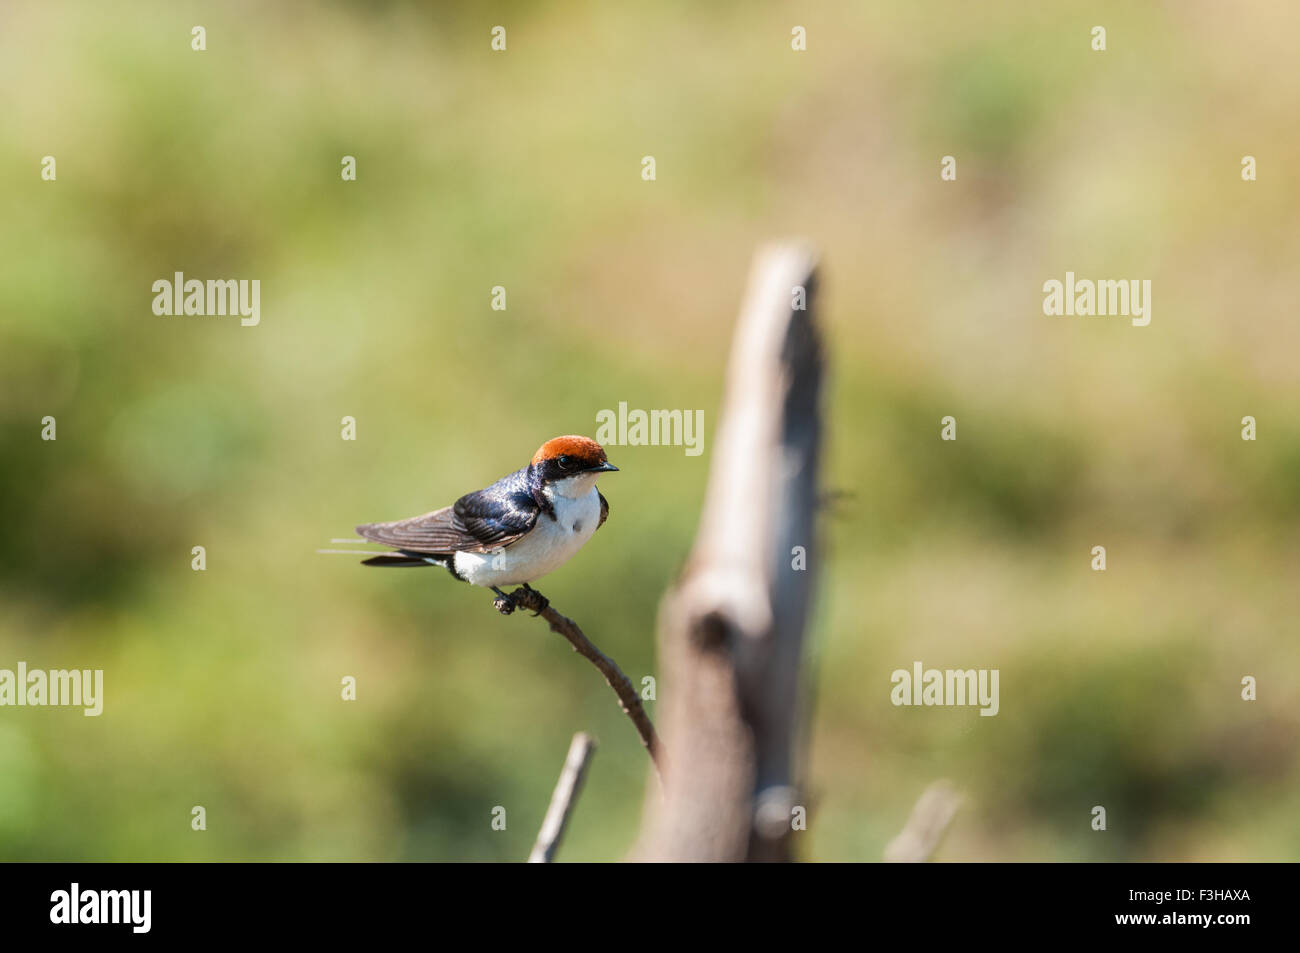 Wire-tailed swallow perched on a thin branch Stock Photo